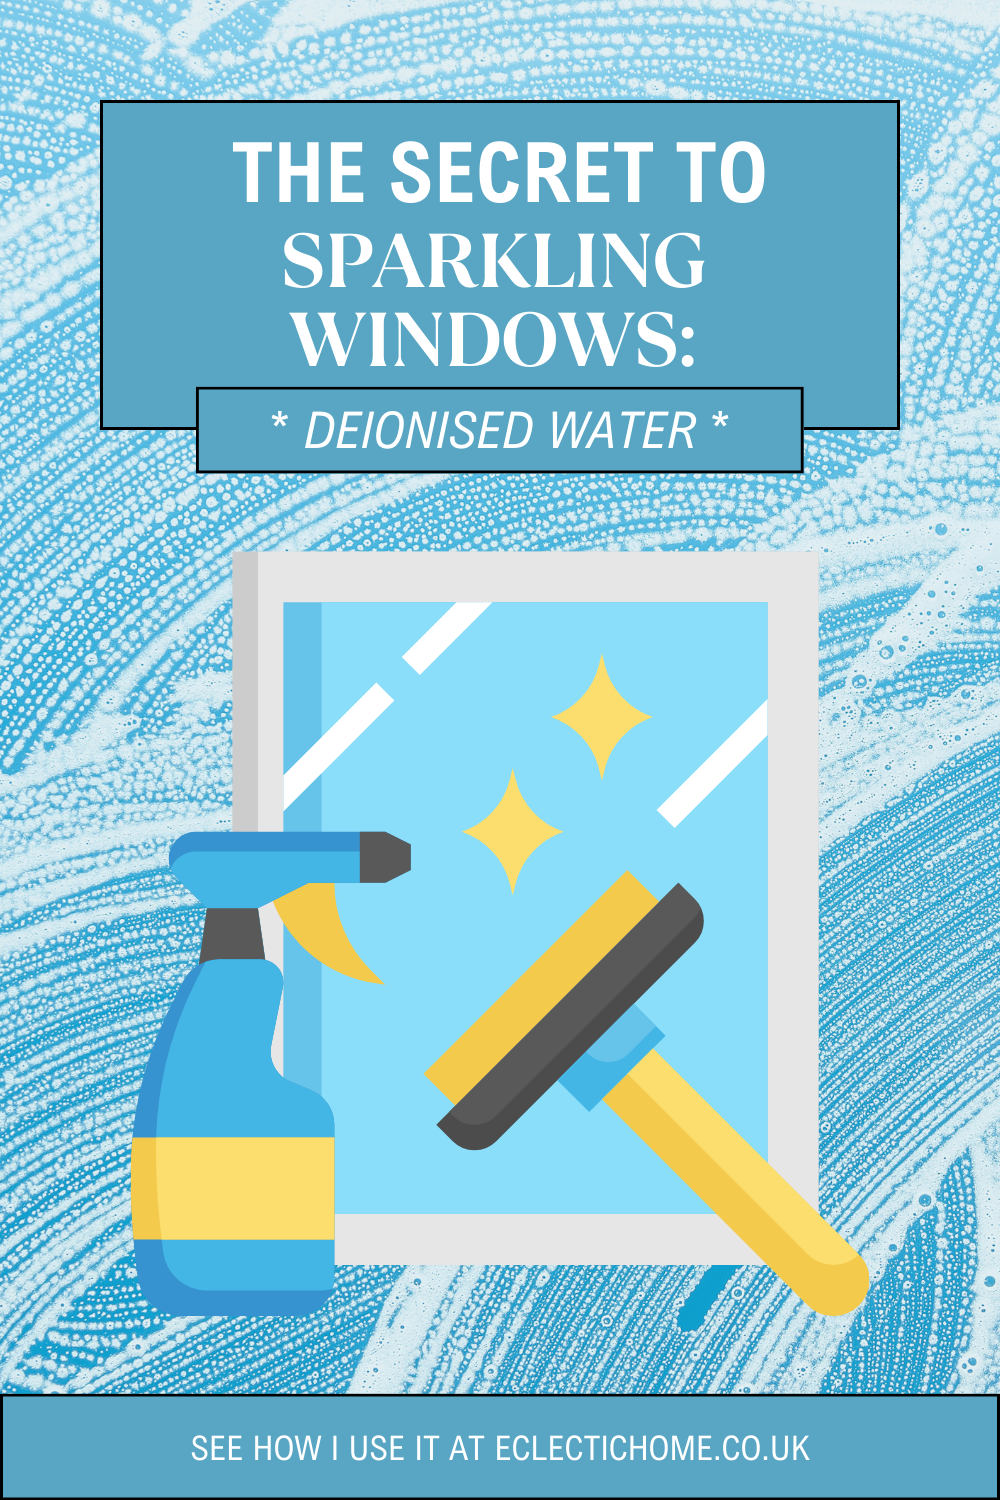 Graphic showing background of water and bubbles during window cleaning.  Foreground shows window cleaning tools illustration. Text reads "the secret to sparkling windows: deionised water". 